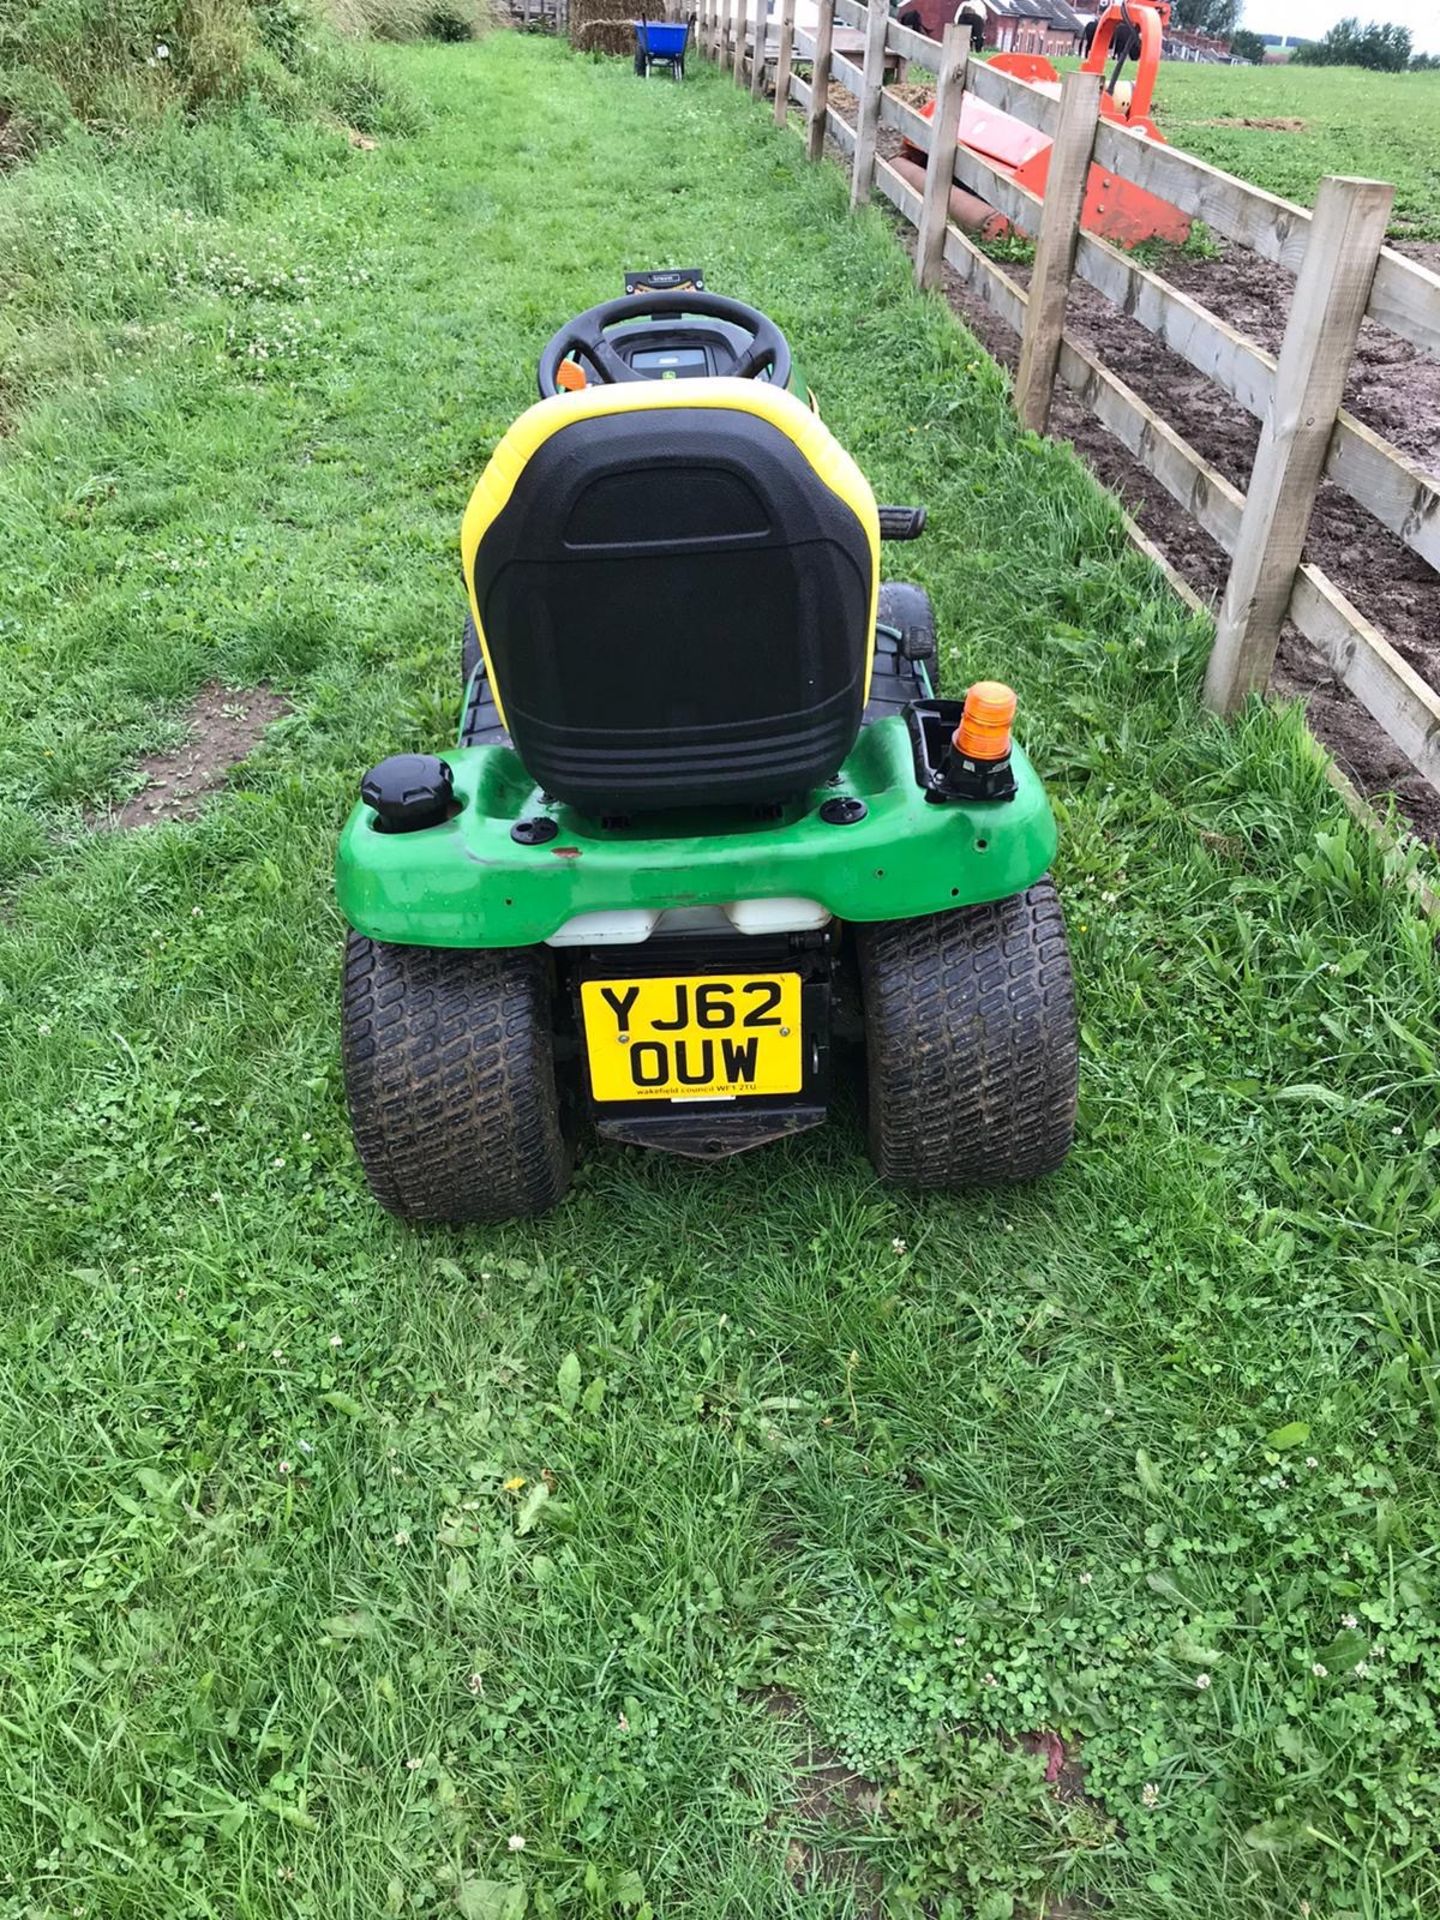 JOHN DEERE X320 RIDE ON LAWN MOWER, C/W 42" MID MOUNTED DECK, YEAR 2013, WORKING HOURS 1237 - Image 3 of 7